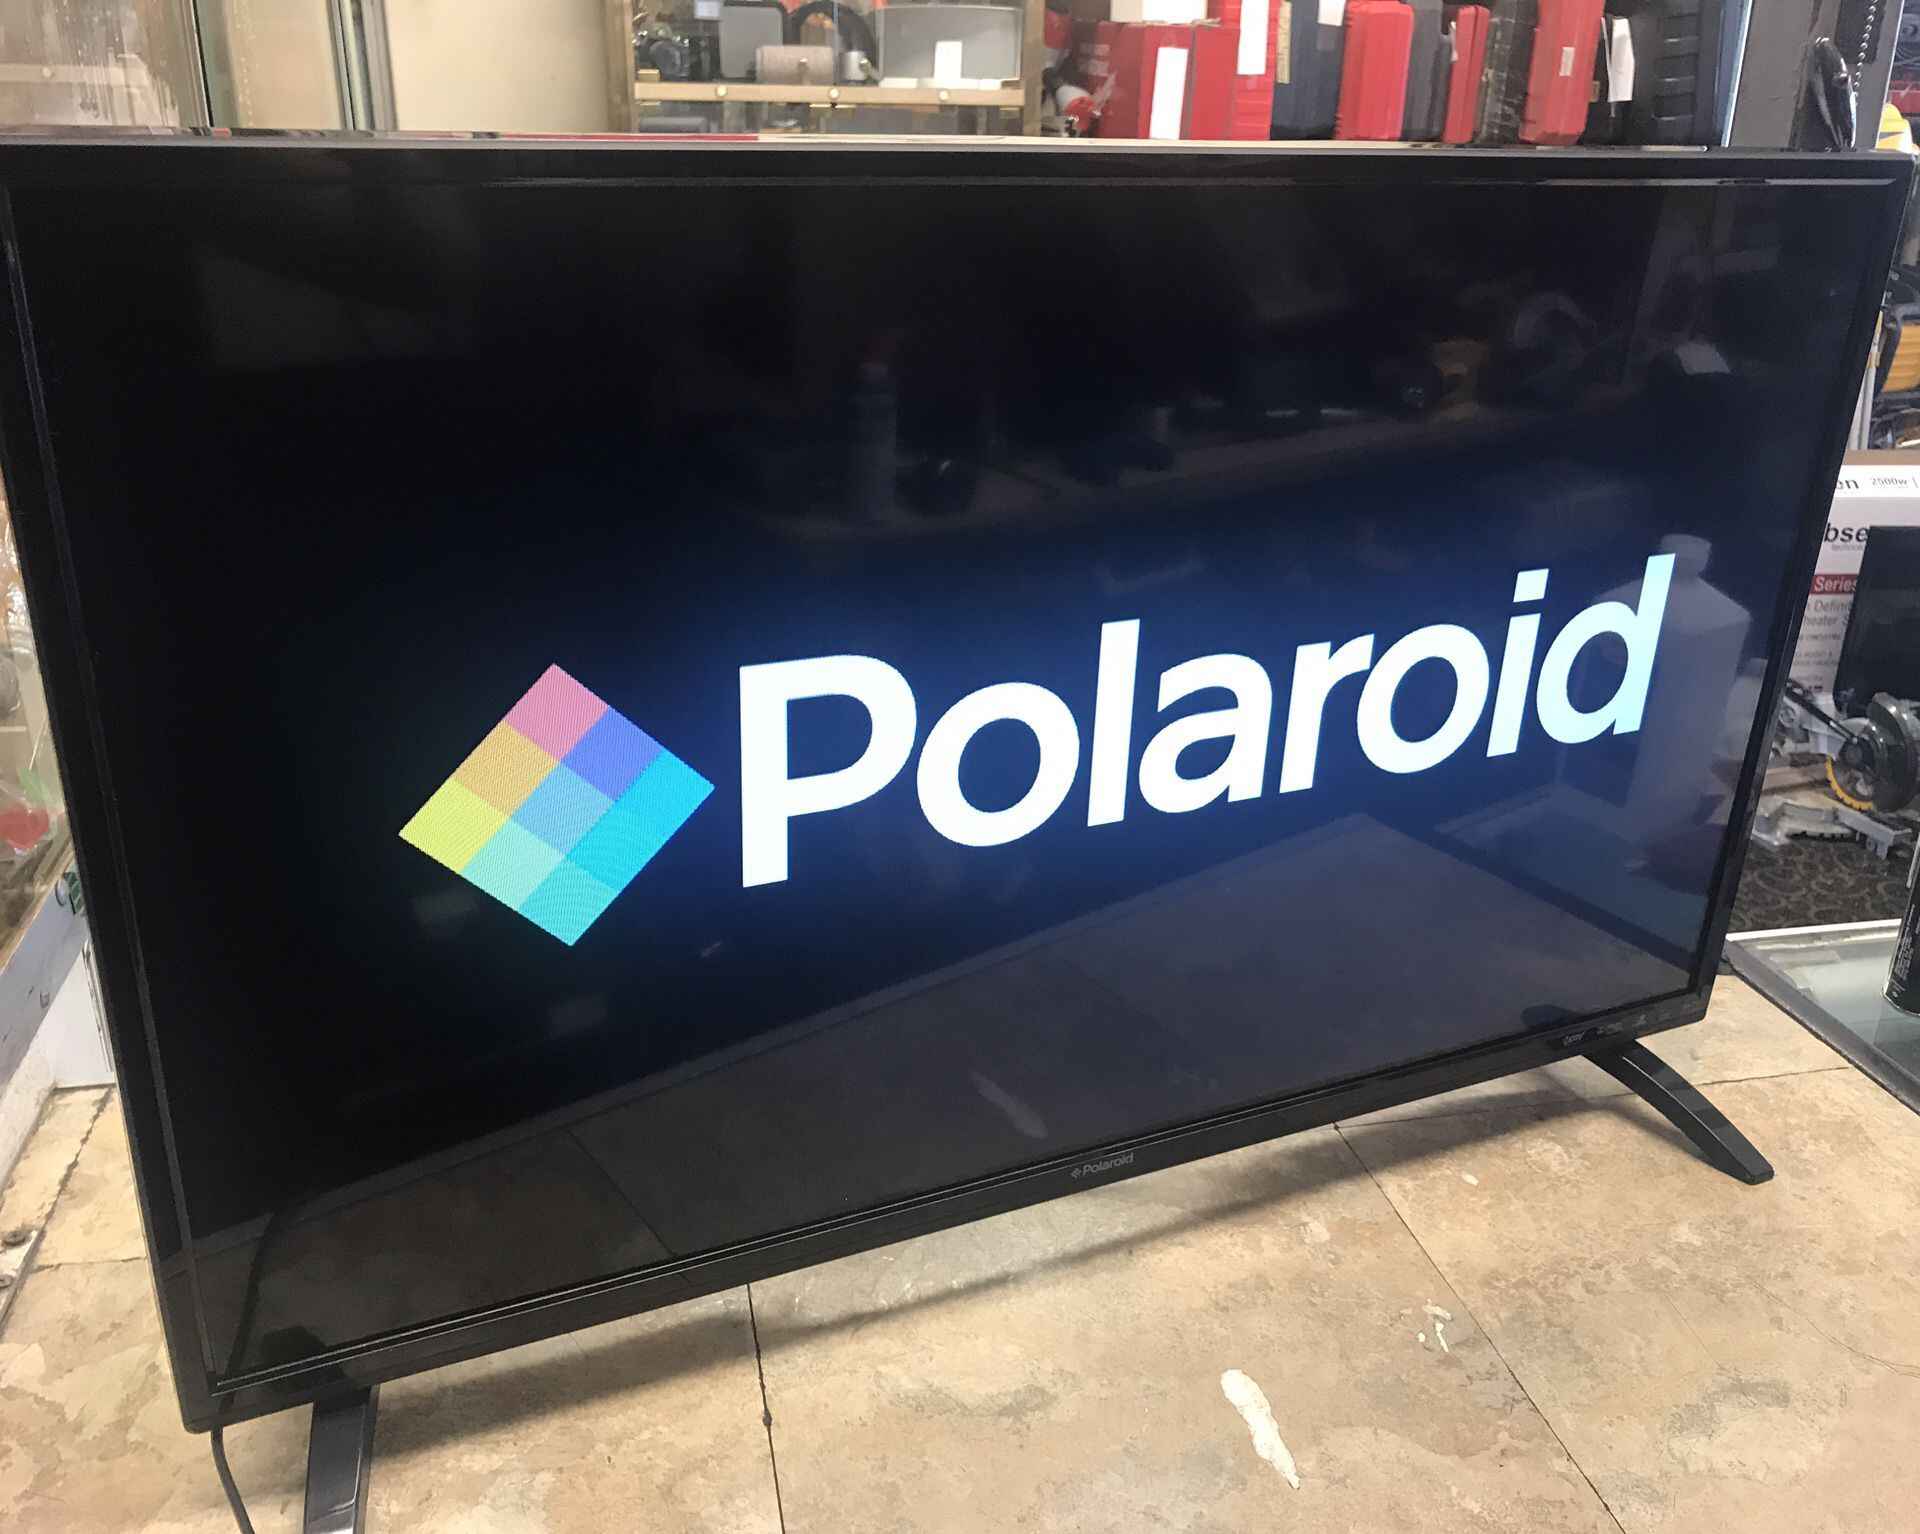 where-is-the-safety-fuse-on-polaroid-32-hd-led-tv-model-32gsr3000fc